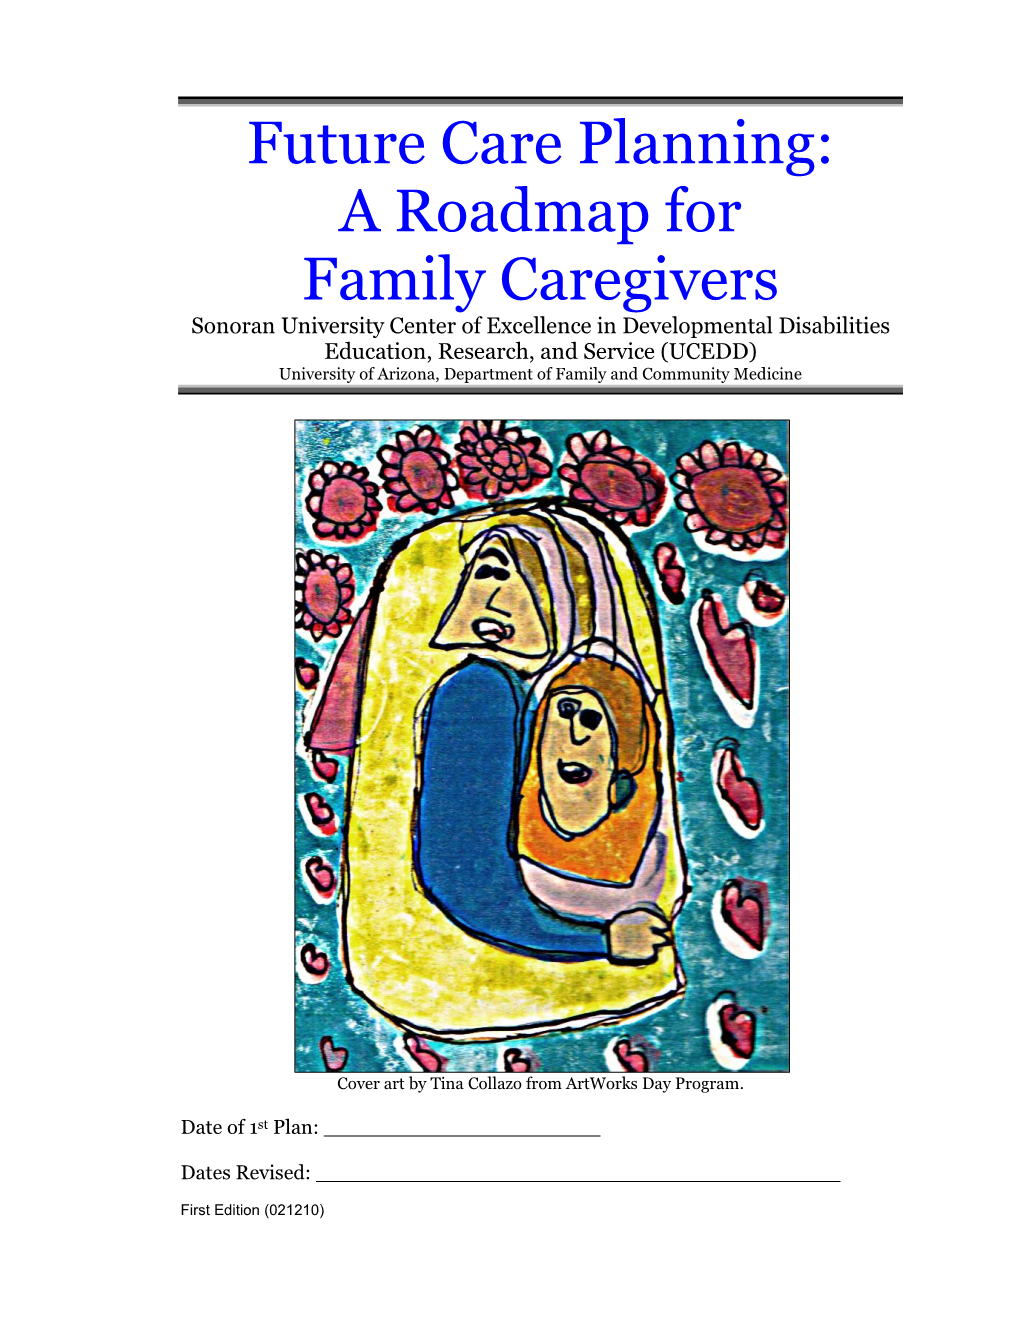 Future Care Planning: a Roadmap for Family Caregivers